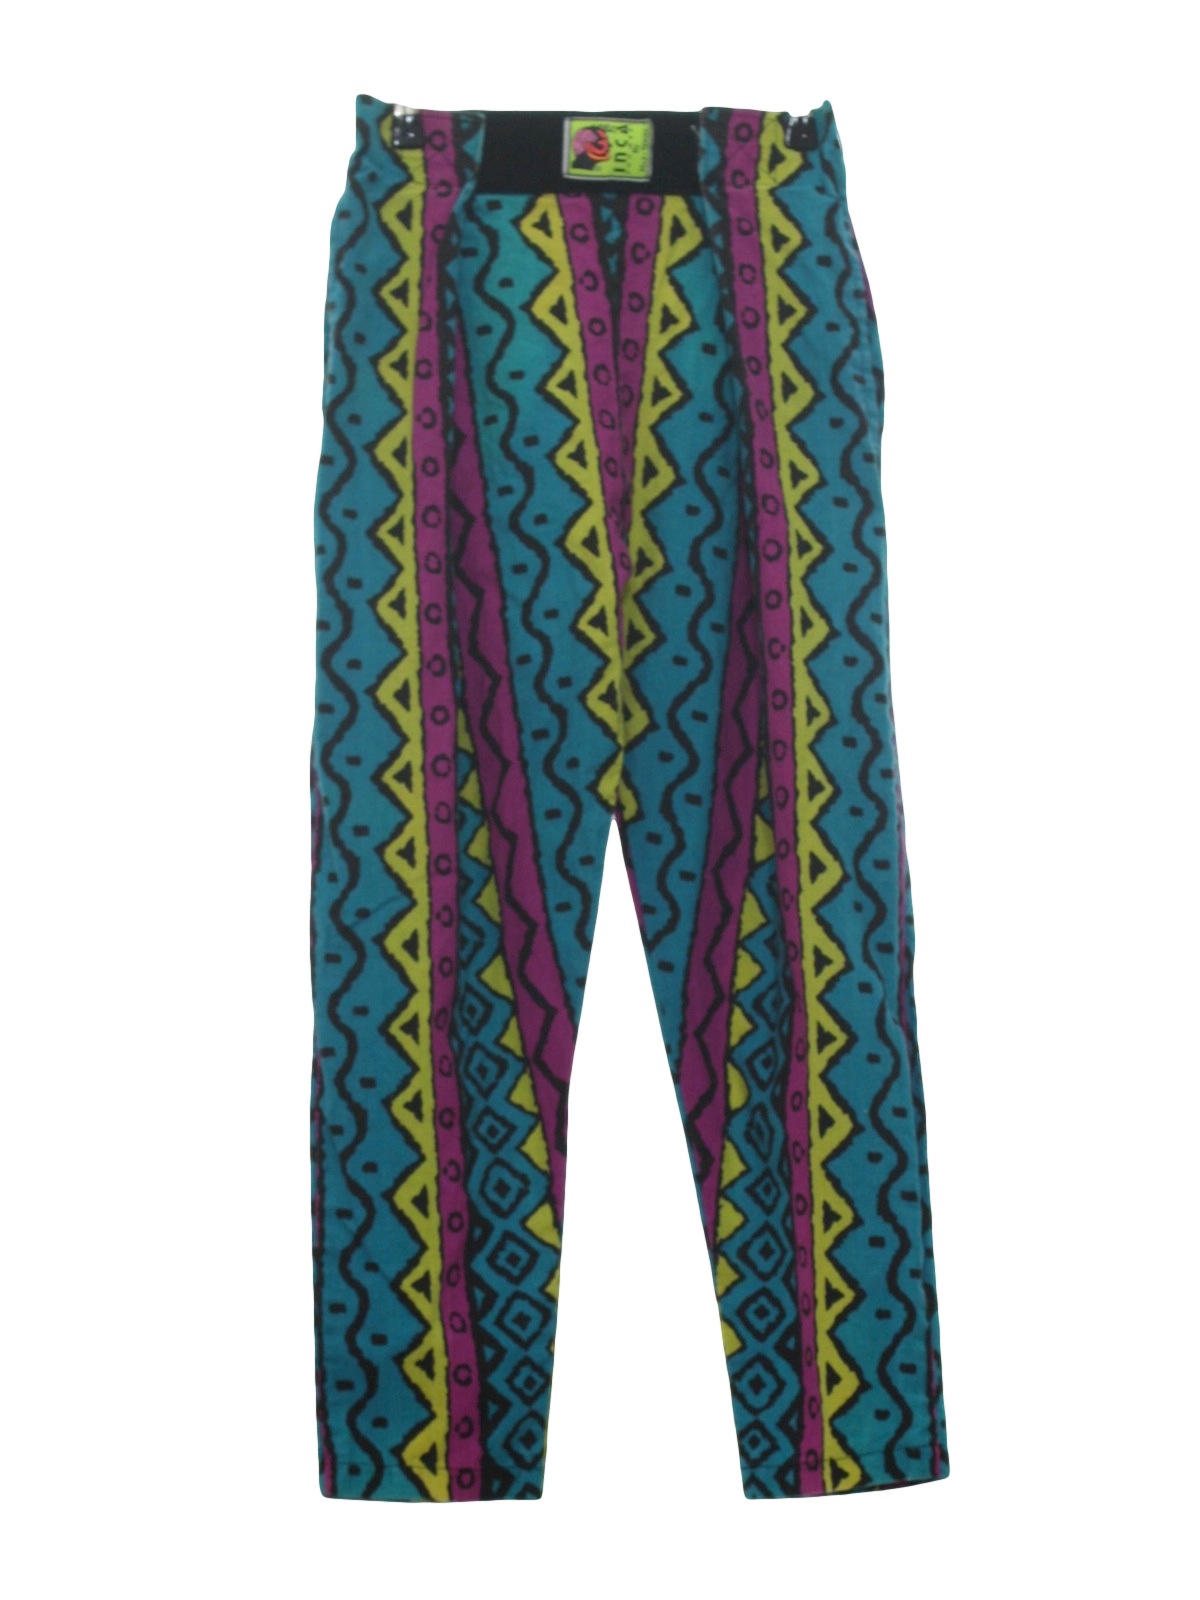 1980s Vintage Pants: 80s -Inca- Mens/boys teal blue background with ...